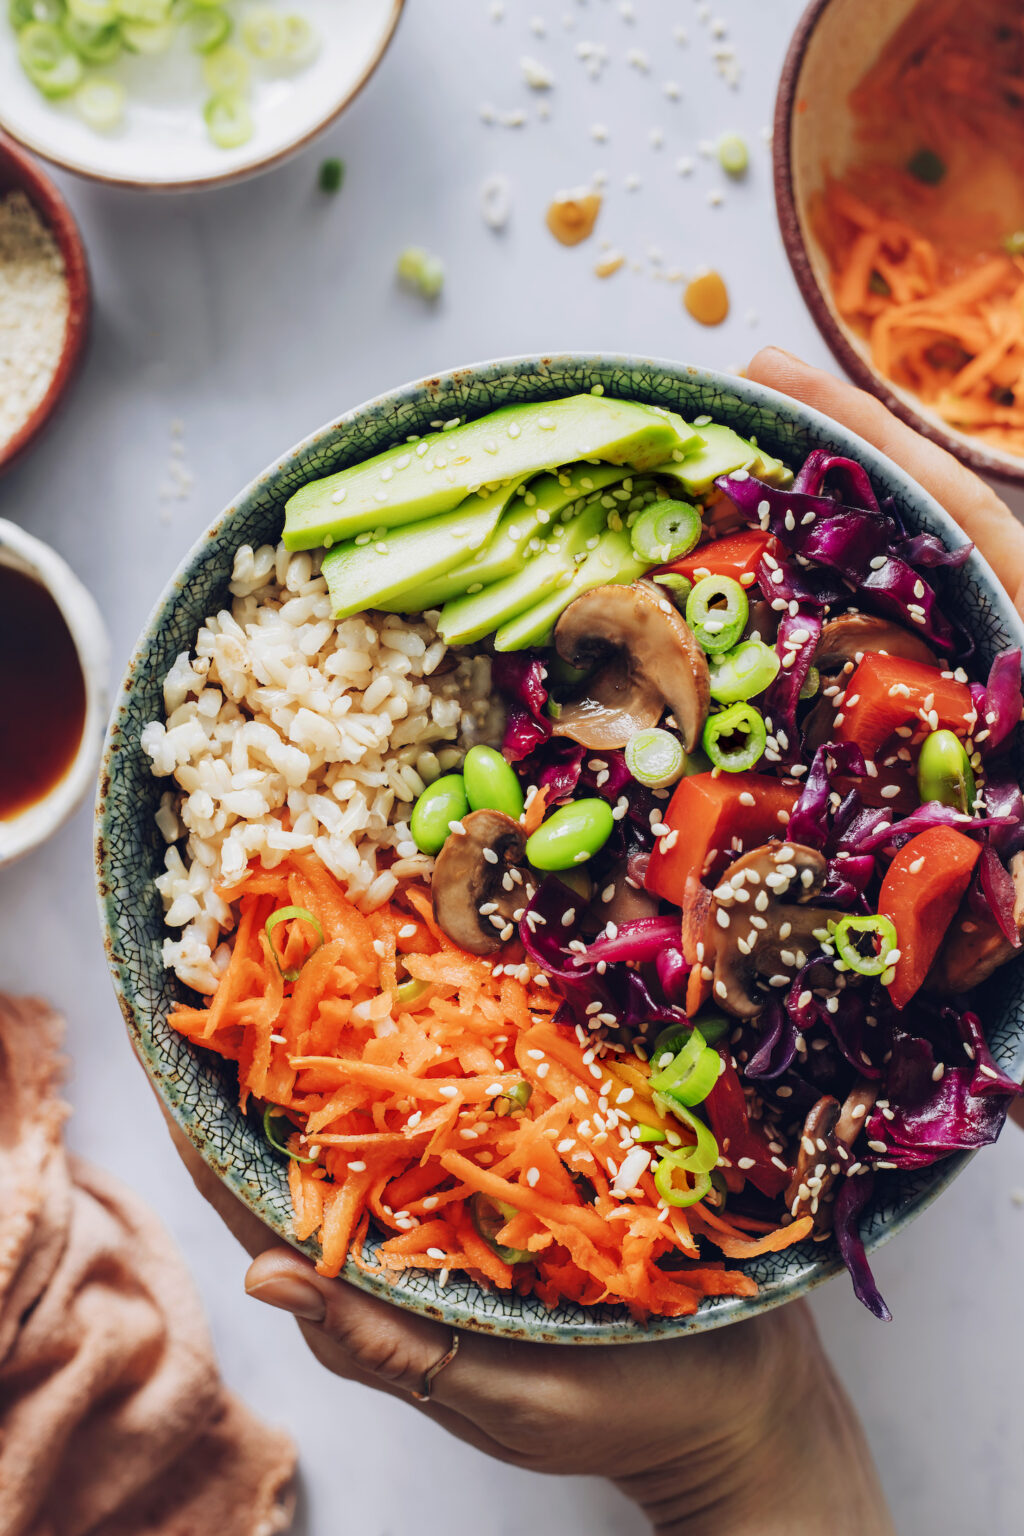 How a Plant-Based Diet Is A Win-Win | Sustainable Blog Edition #19